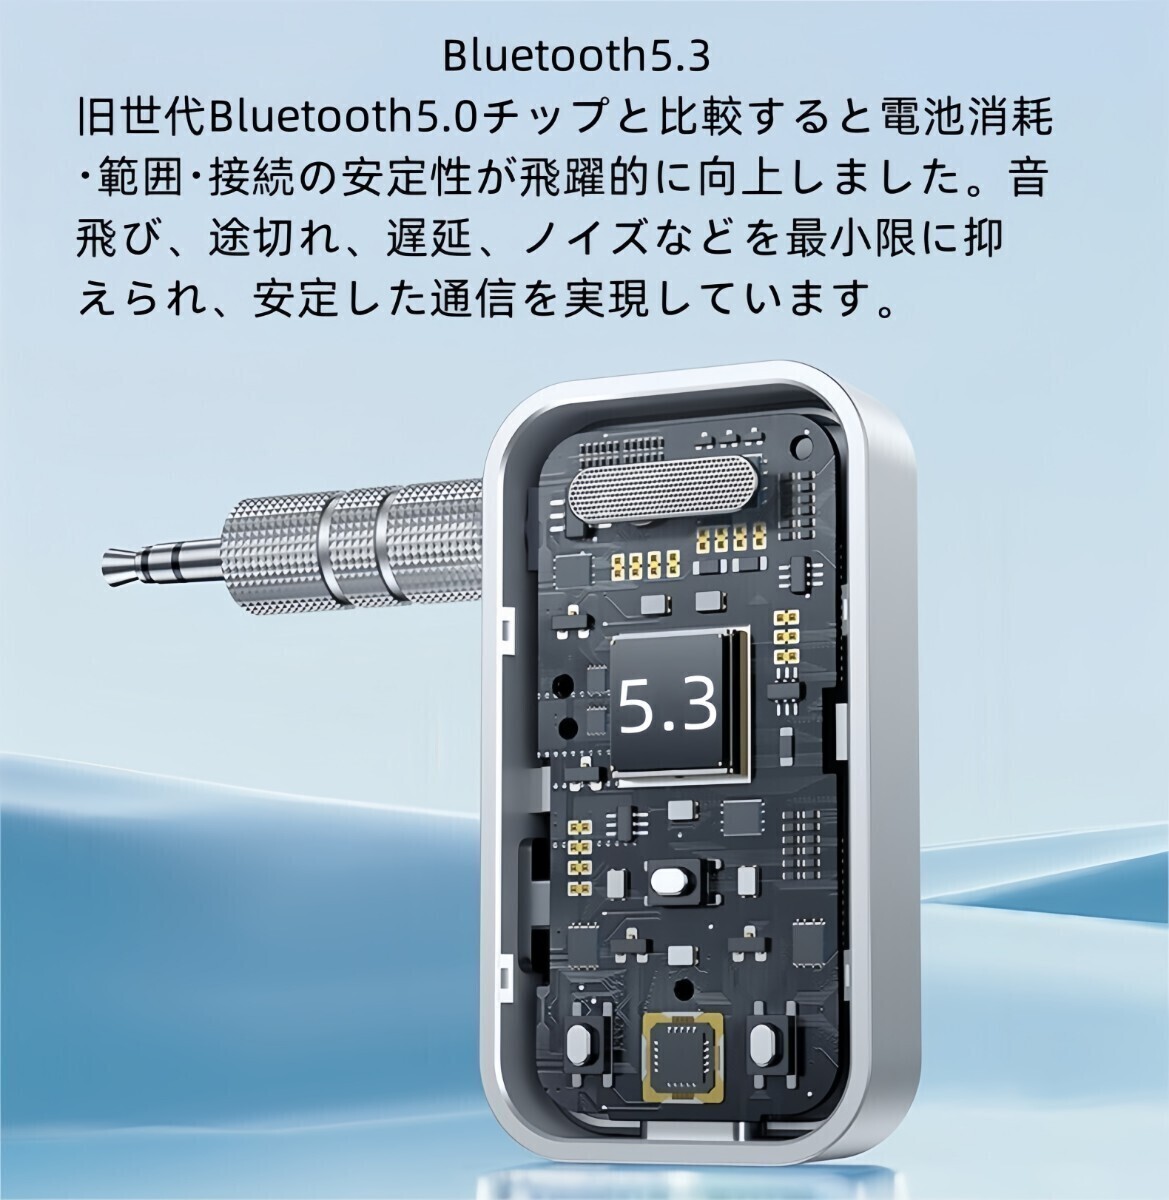 Bluetooth5.3 microminiature transmitter & receiver receiver + transmitter one pcs two position sending reception both correspondence tv bluetooth hands free telephone call 